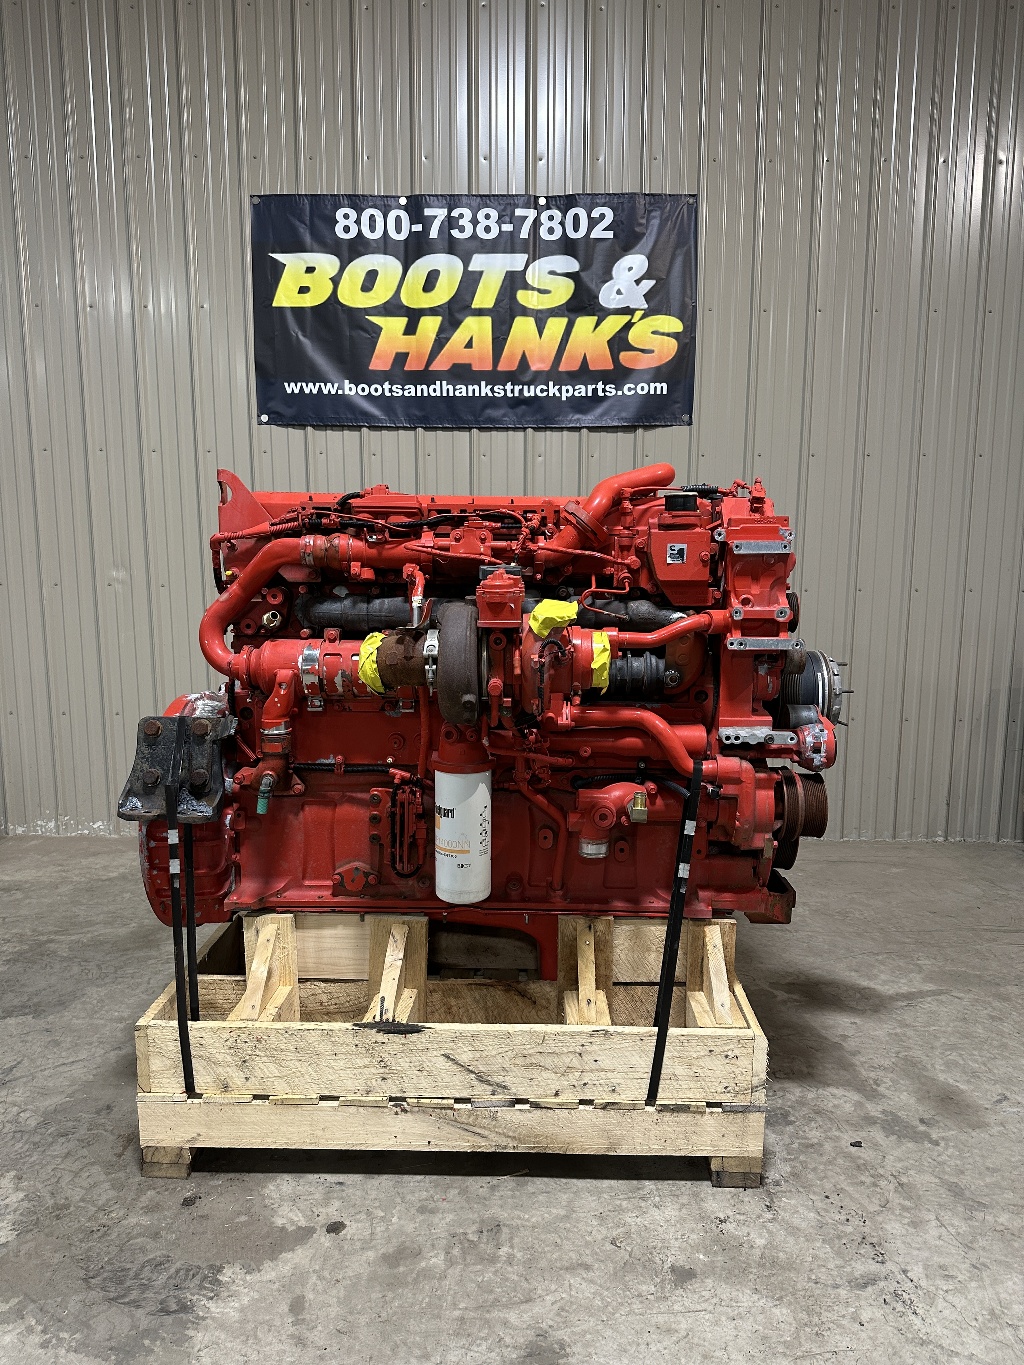 USED 2021 CUMMINS X15 COMPLETE ENGINE TRUCK PARTS #1981